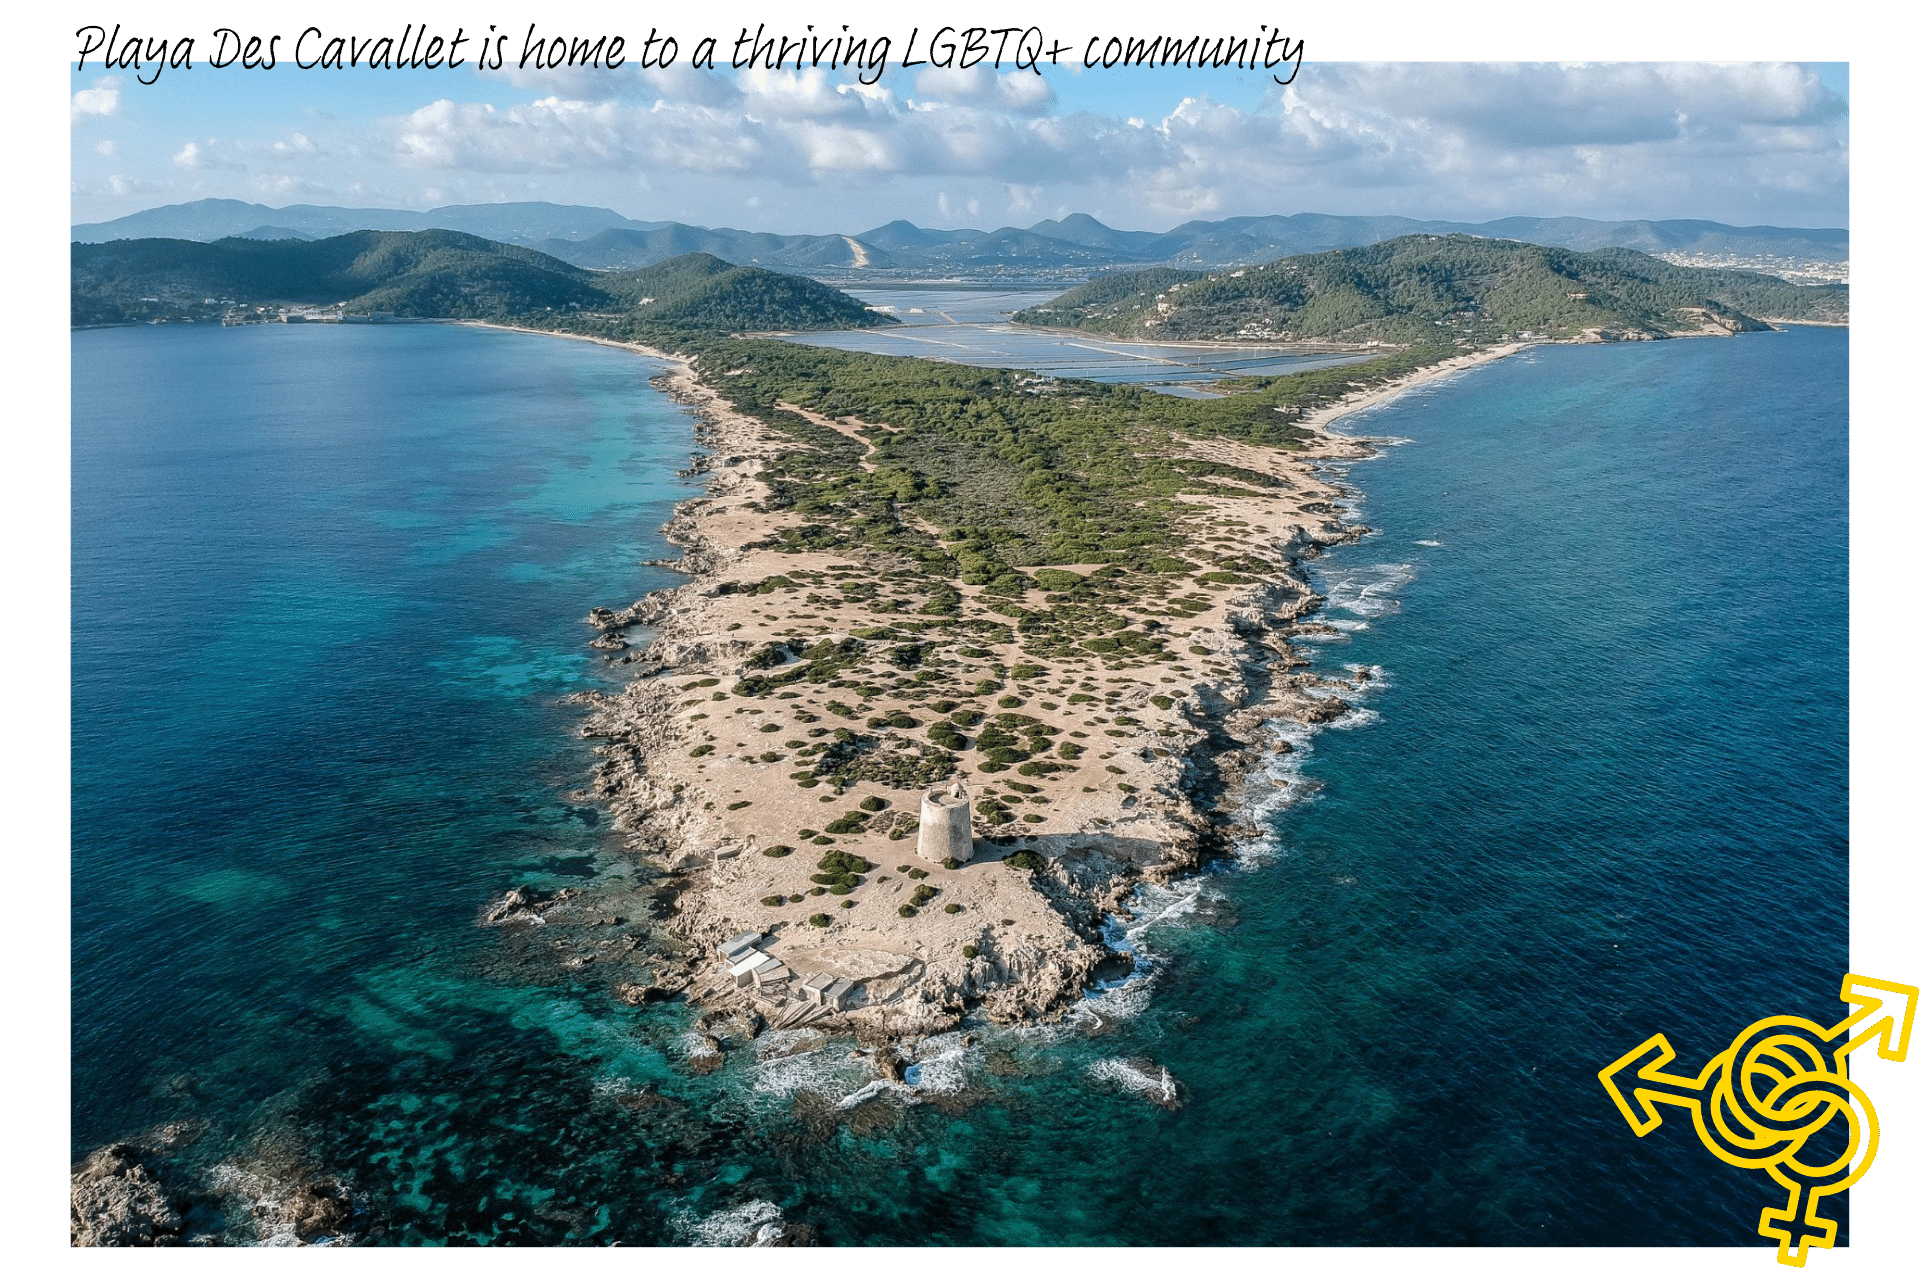 Playa des Cavallet in Ibiza is one of the world's best nudist beaches for members of the LGBTQ+ community. A rocky outcrop reaches toward the viewer, with two beaches running down either side of it, green hills in the far distance.